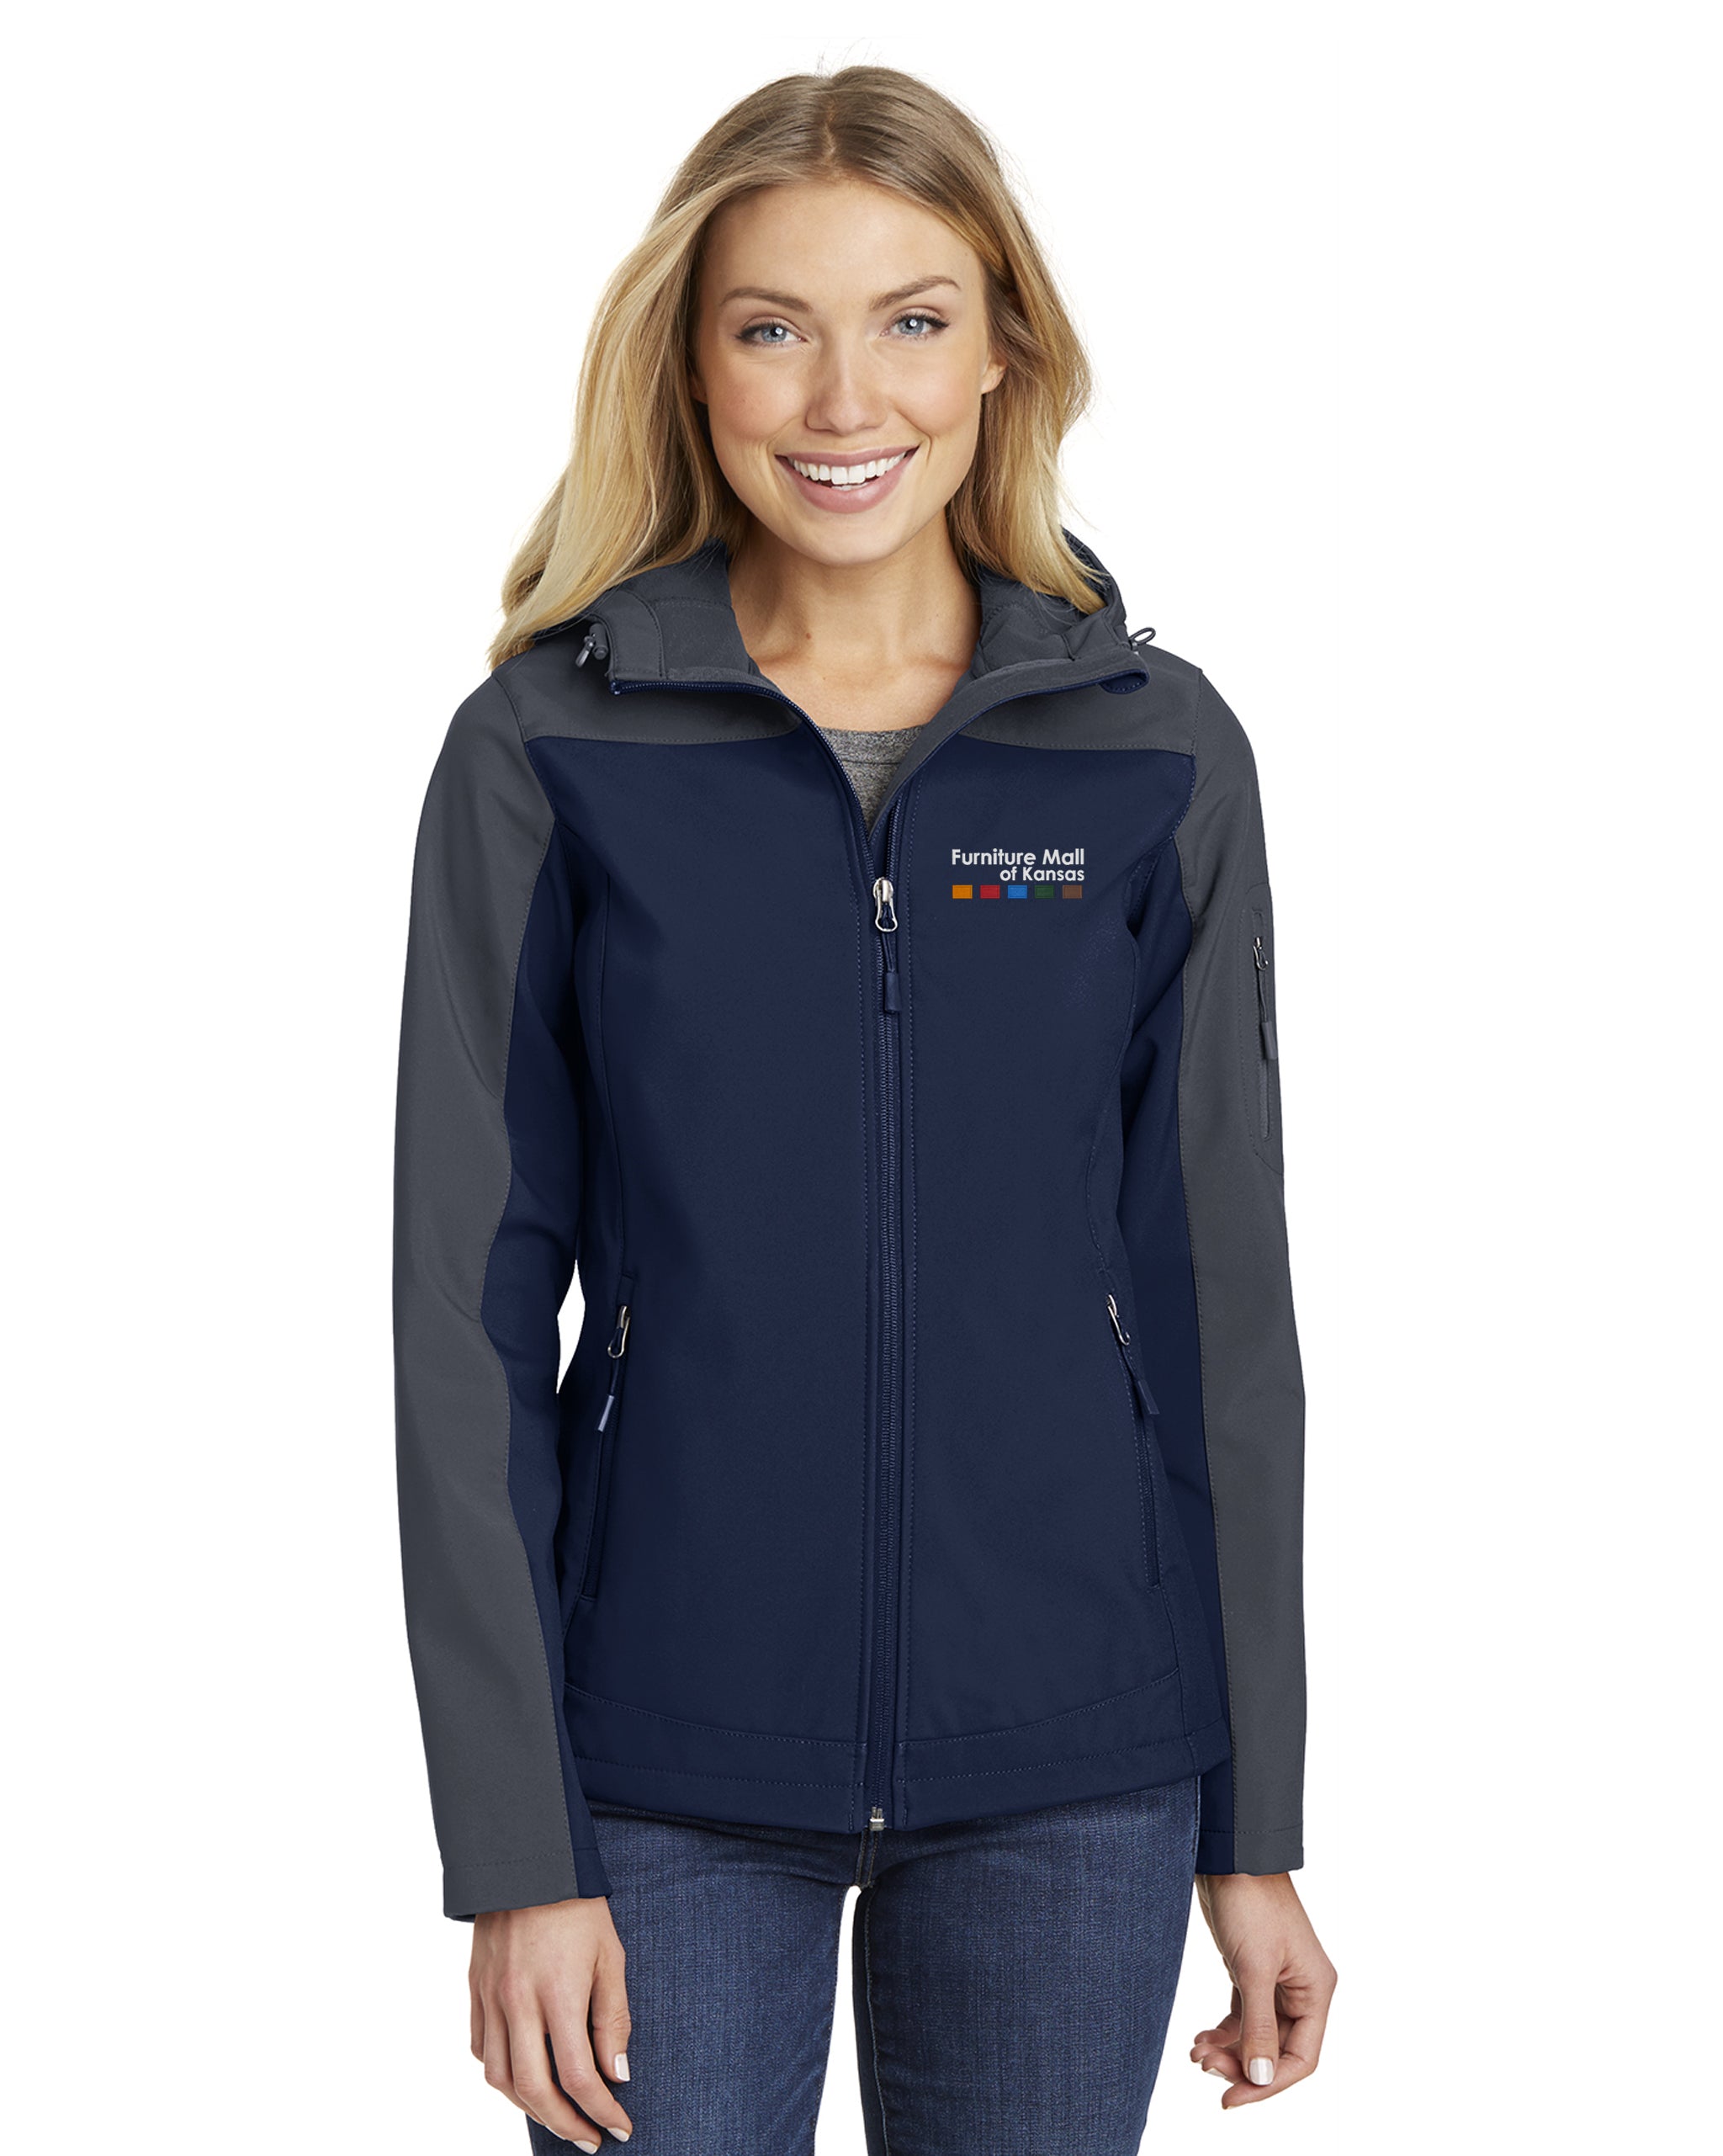 Furniture Mall of Kansas - Port Authority Ladies Hooded Core Soft Shell Jacket - L335